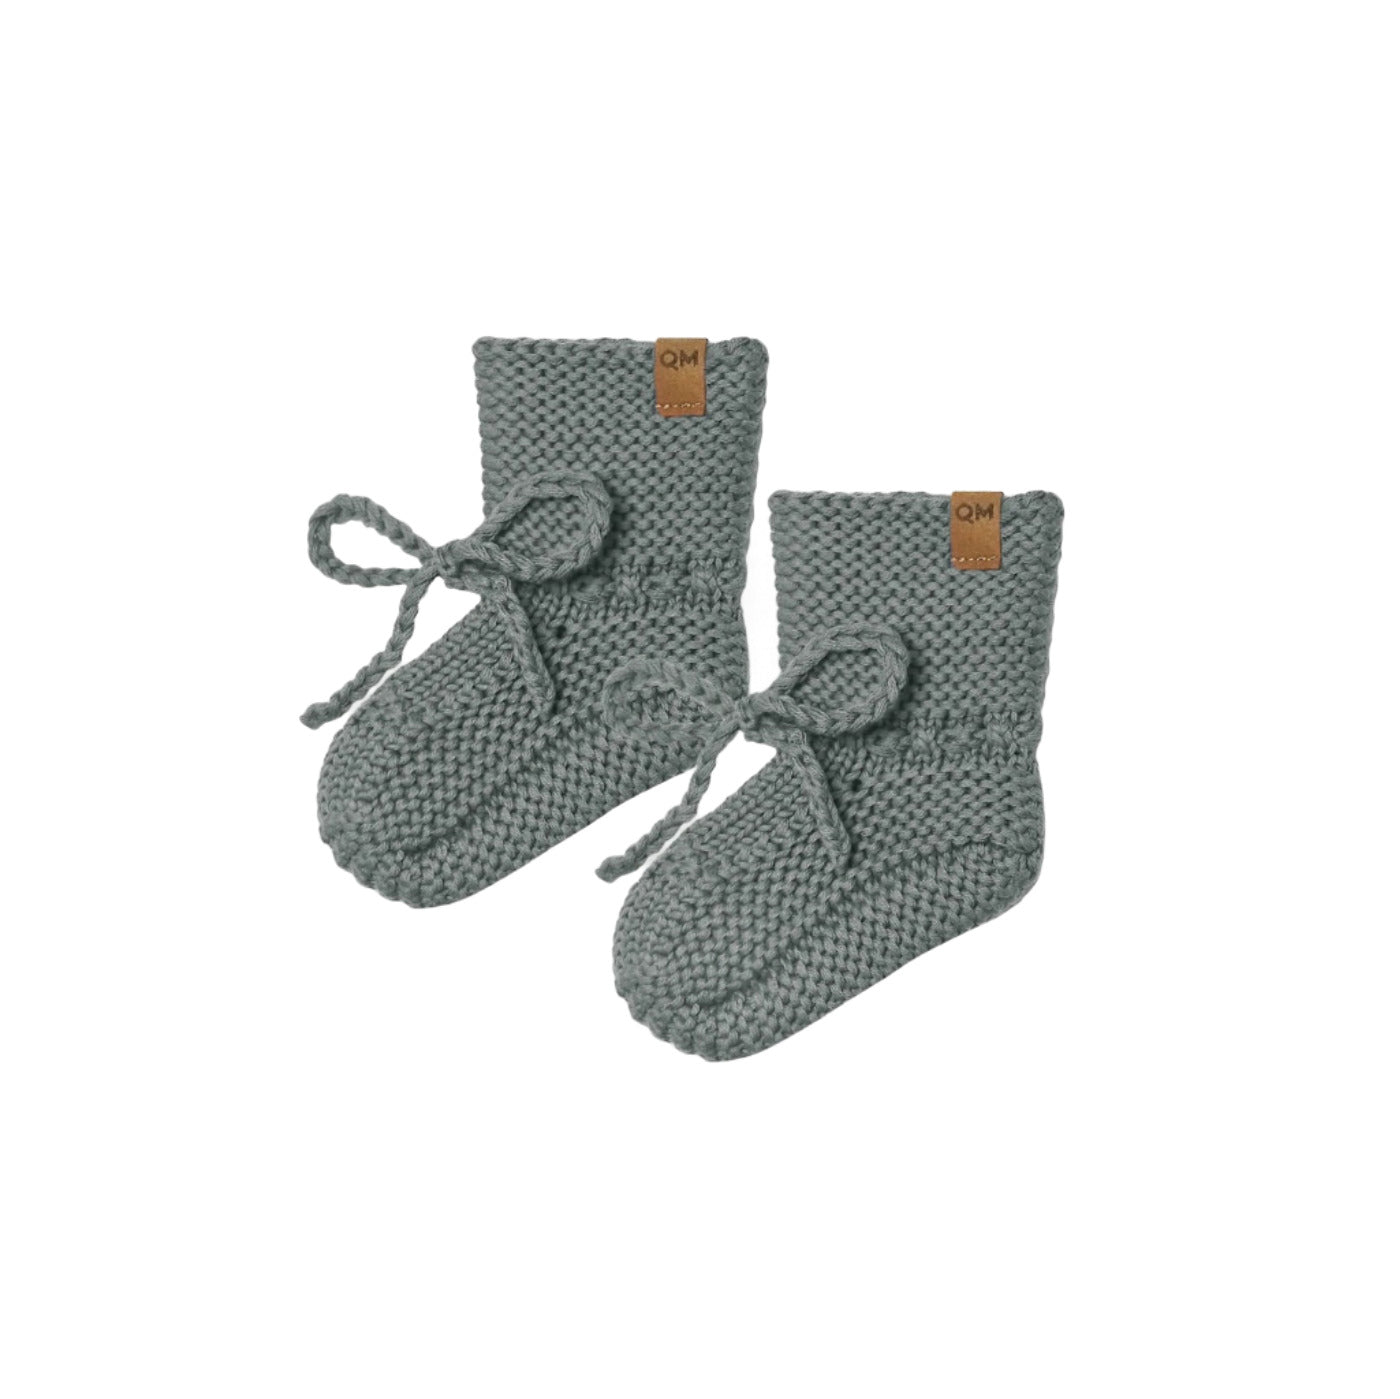 QUINCY MAE Knit Booties Dusk ALWAYS SHOW